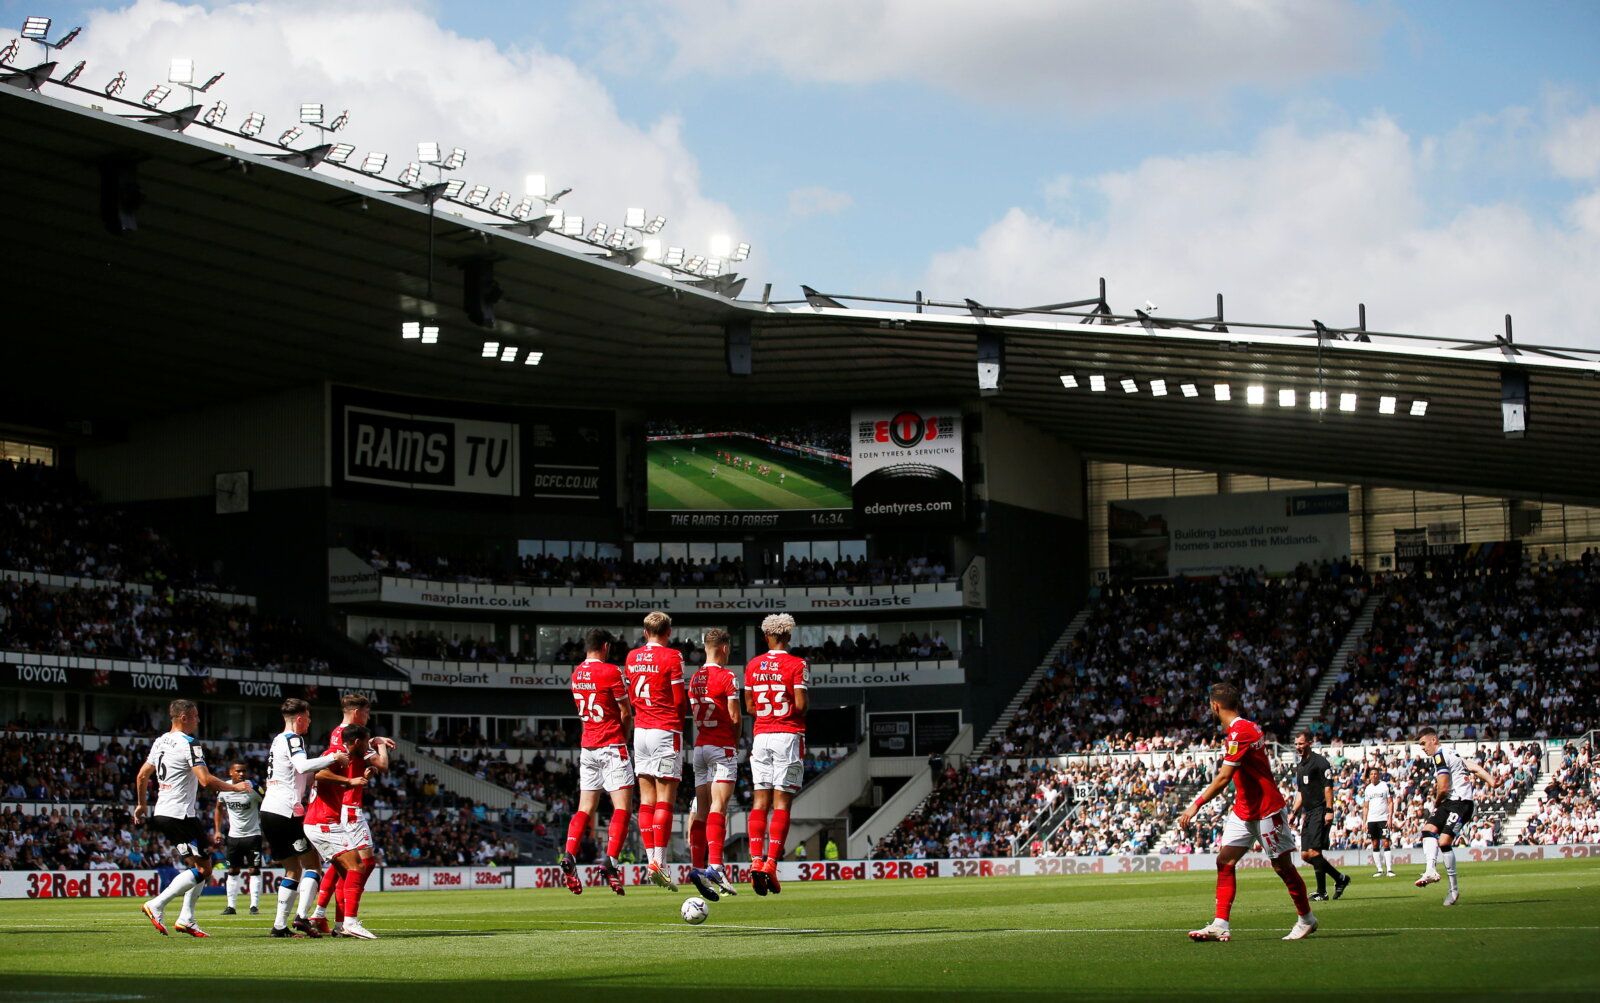 Soccer Football - Championship - Derby County v Nottingham Forest - Pride Park, Derby, Britain - August 28, 2021  General view of a freekick taken by Derby County's Tom Lawrence   Action Images/Craig Brough